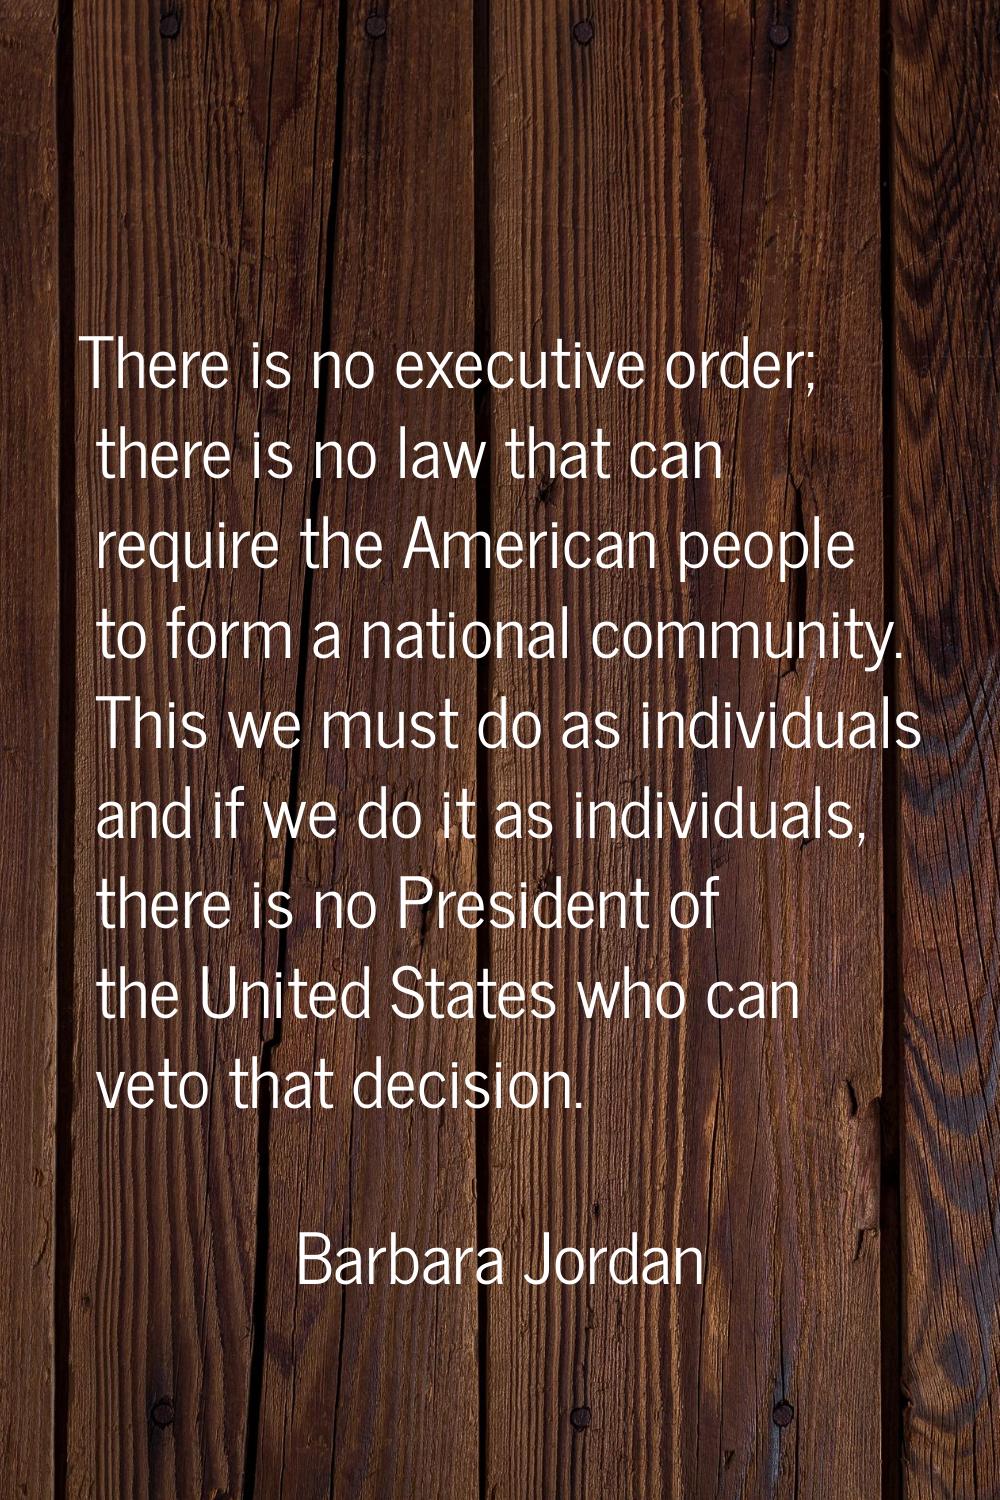 There is no executive order; there is no law that can require the American people to form a nationa